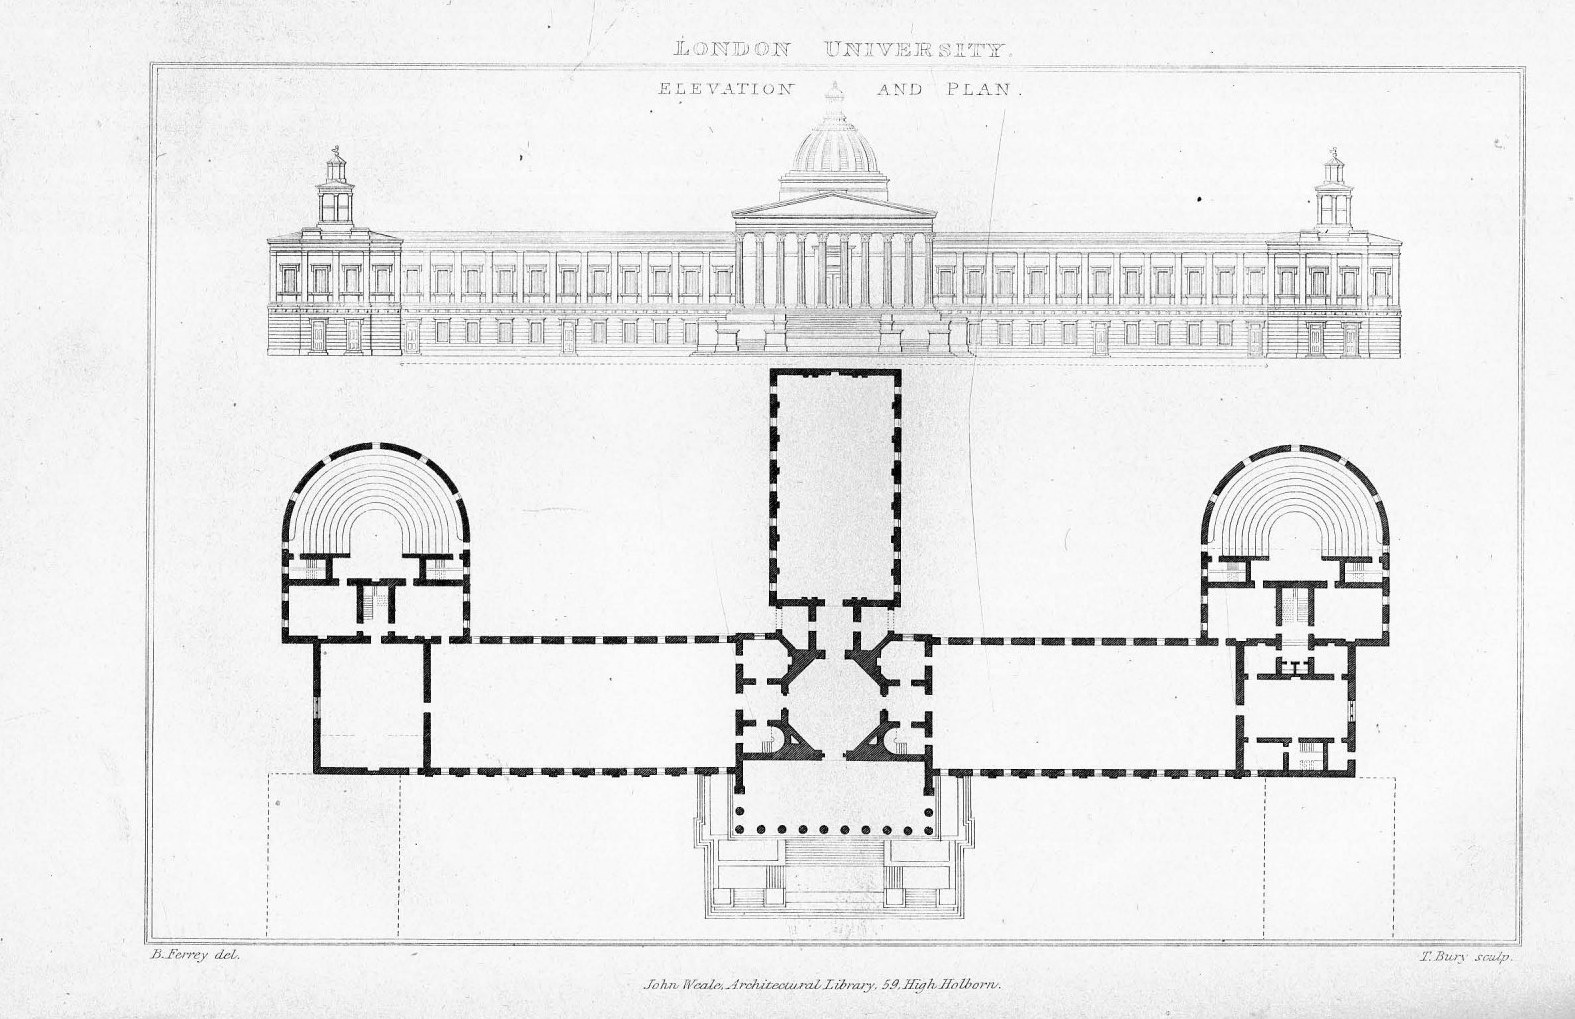 Illustrations of the public buildings of London : With historical and descriptive accounts of each edifice : In 2 volumes / by Pugin and Britton. — Second edition, greatly enlarged by W. H. Leeds. — London : John Weale, 1838